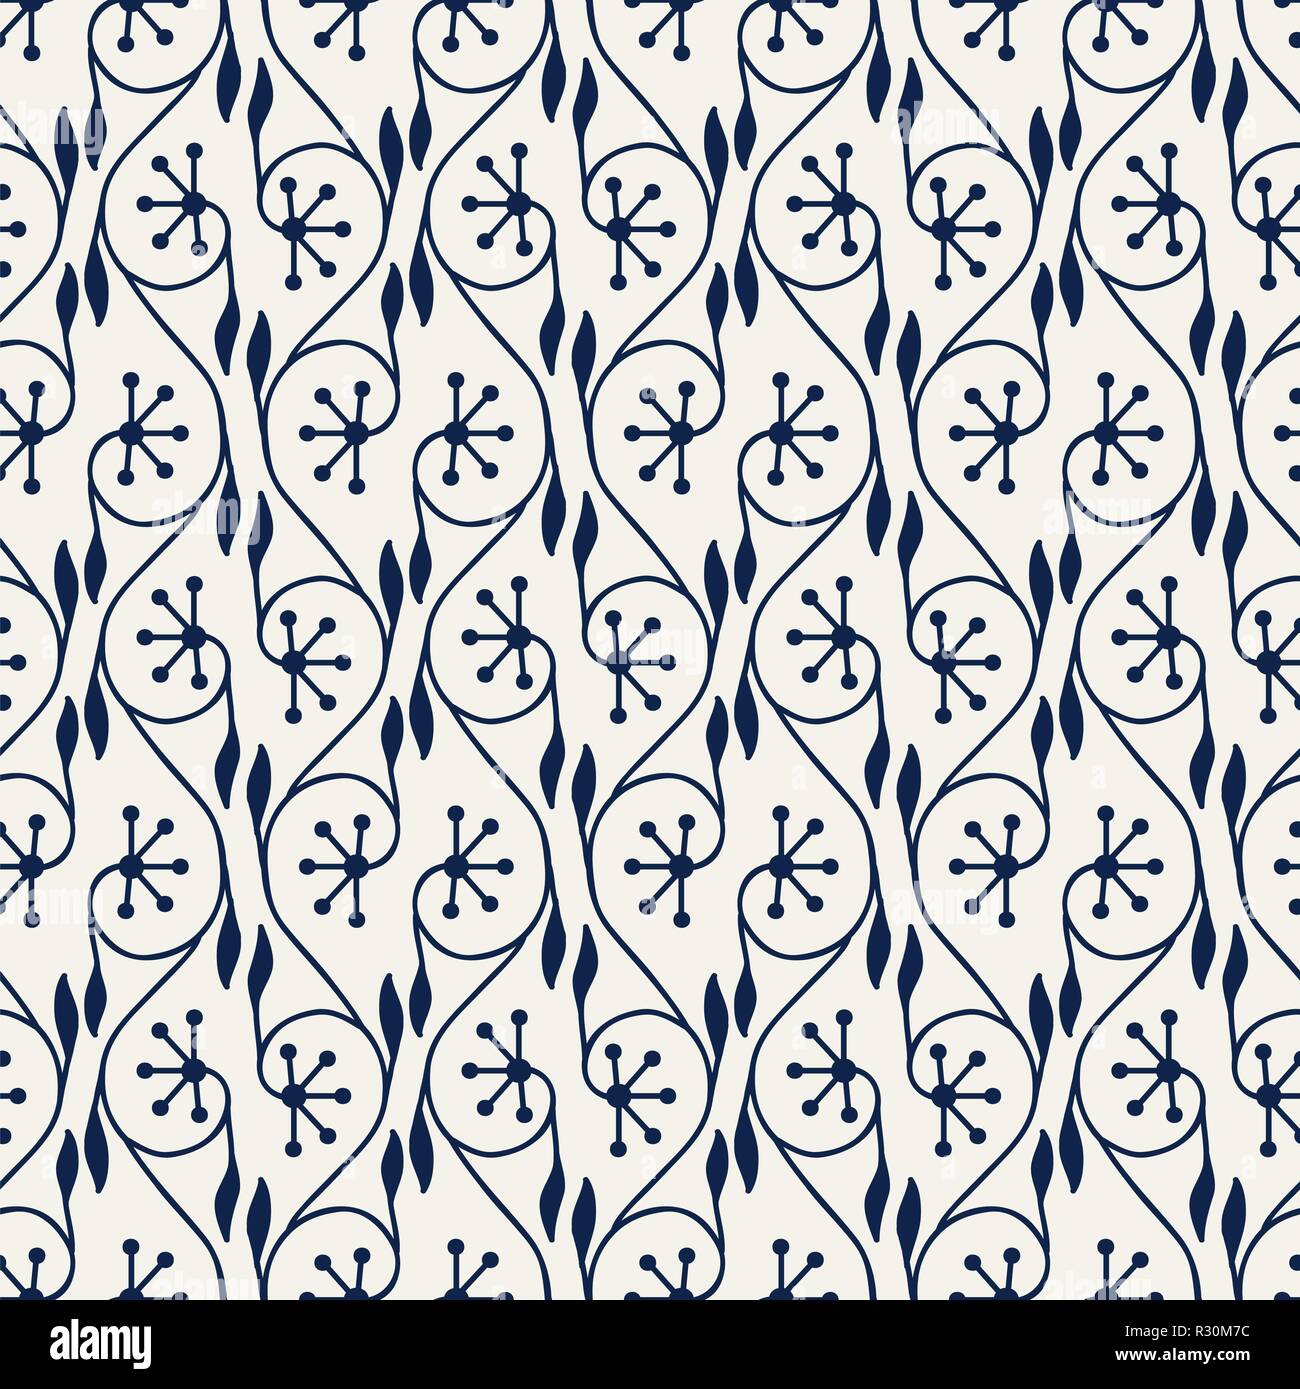 Seamless woodblock printed indigo dye ethnic floral pattern. Traditional oriental ornament of North India, vertical flower garland motif, navy blue Stock Vector